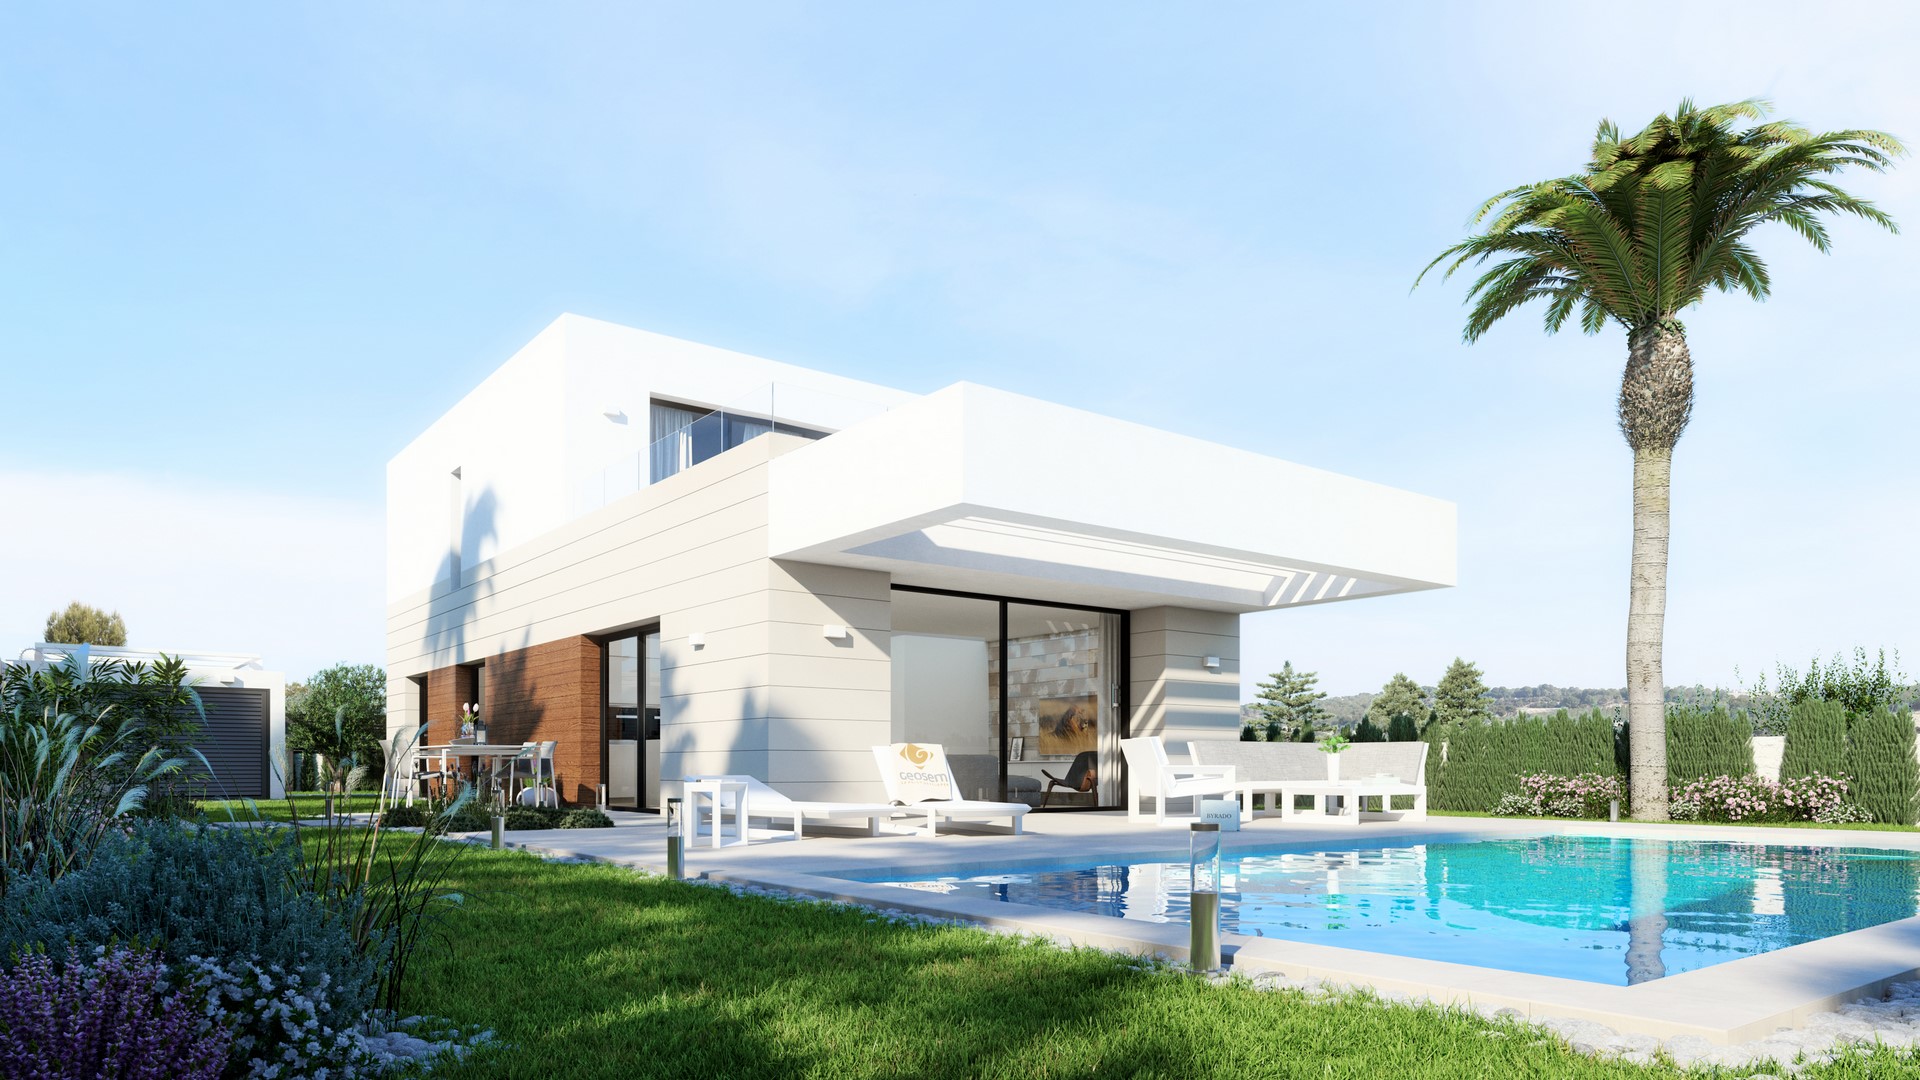 Modern villas being constructed with private pools.